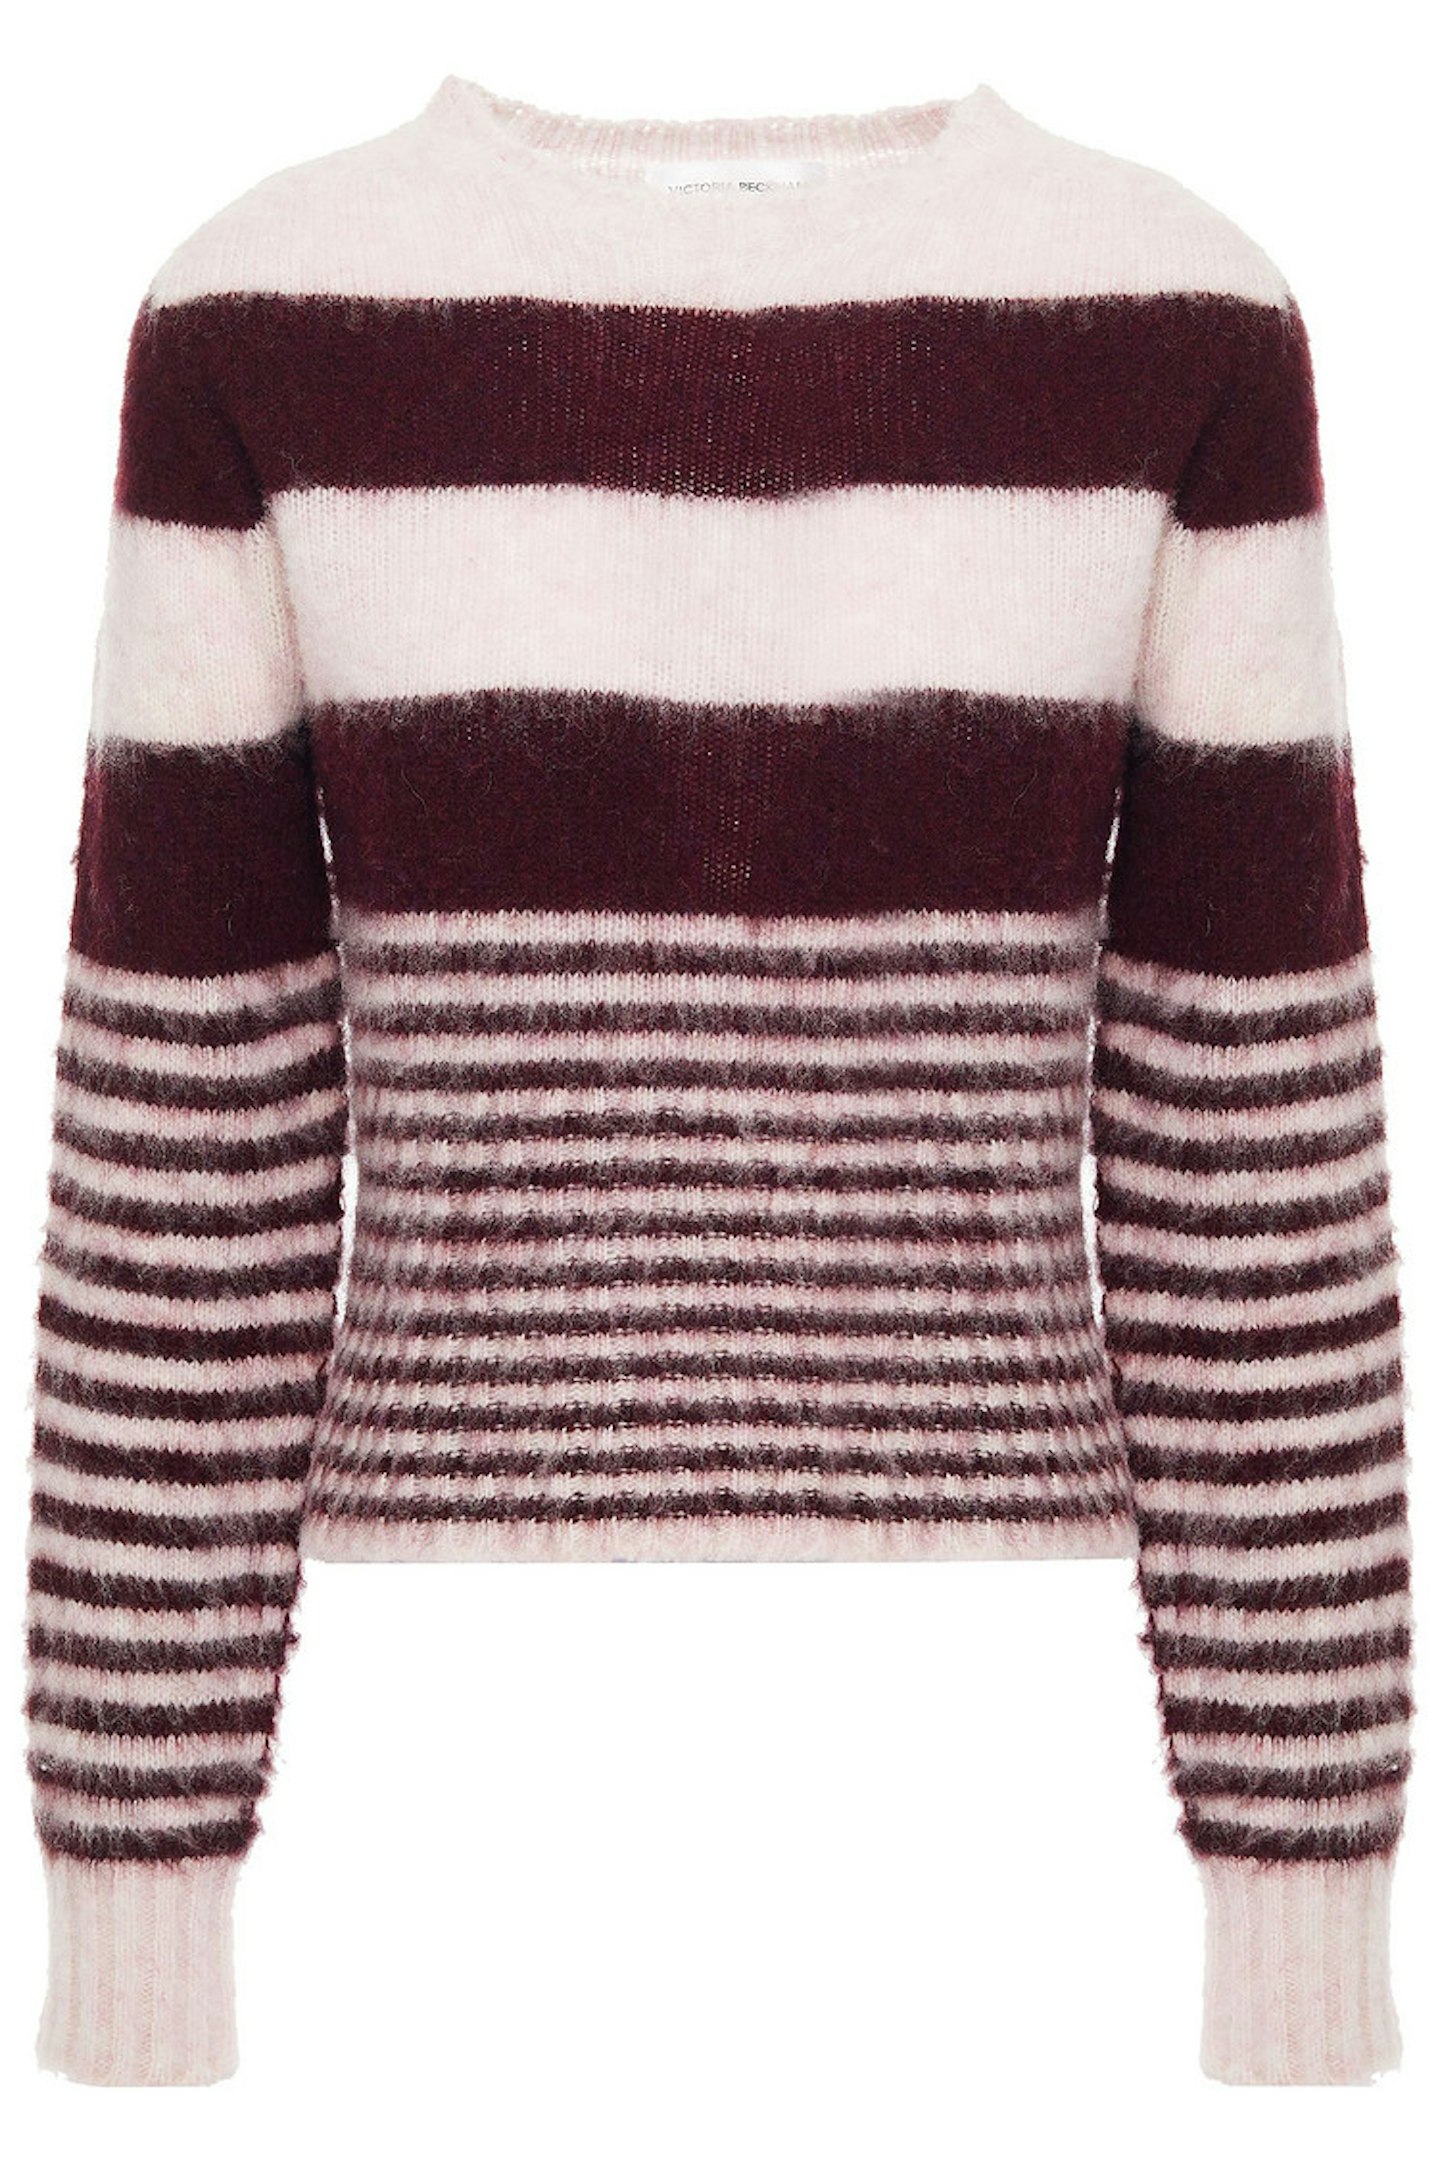 Victoria Beckham at The Outnet, Brushed striped wool sweater, £250